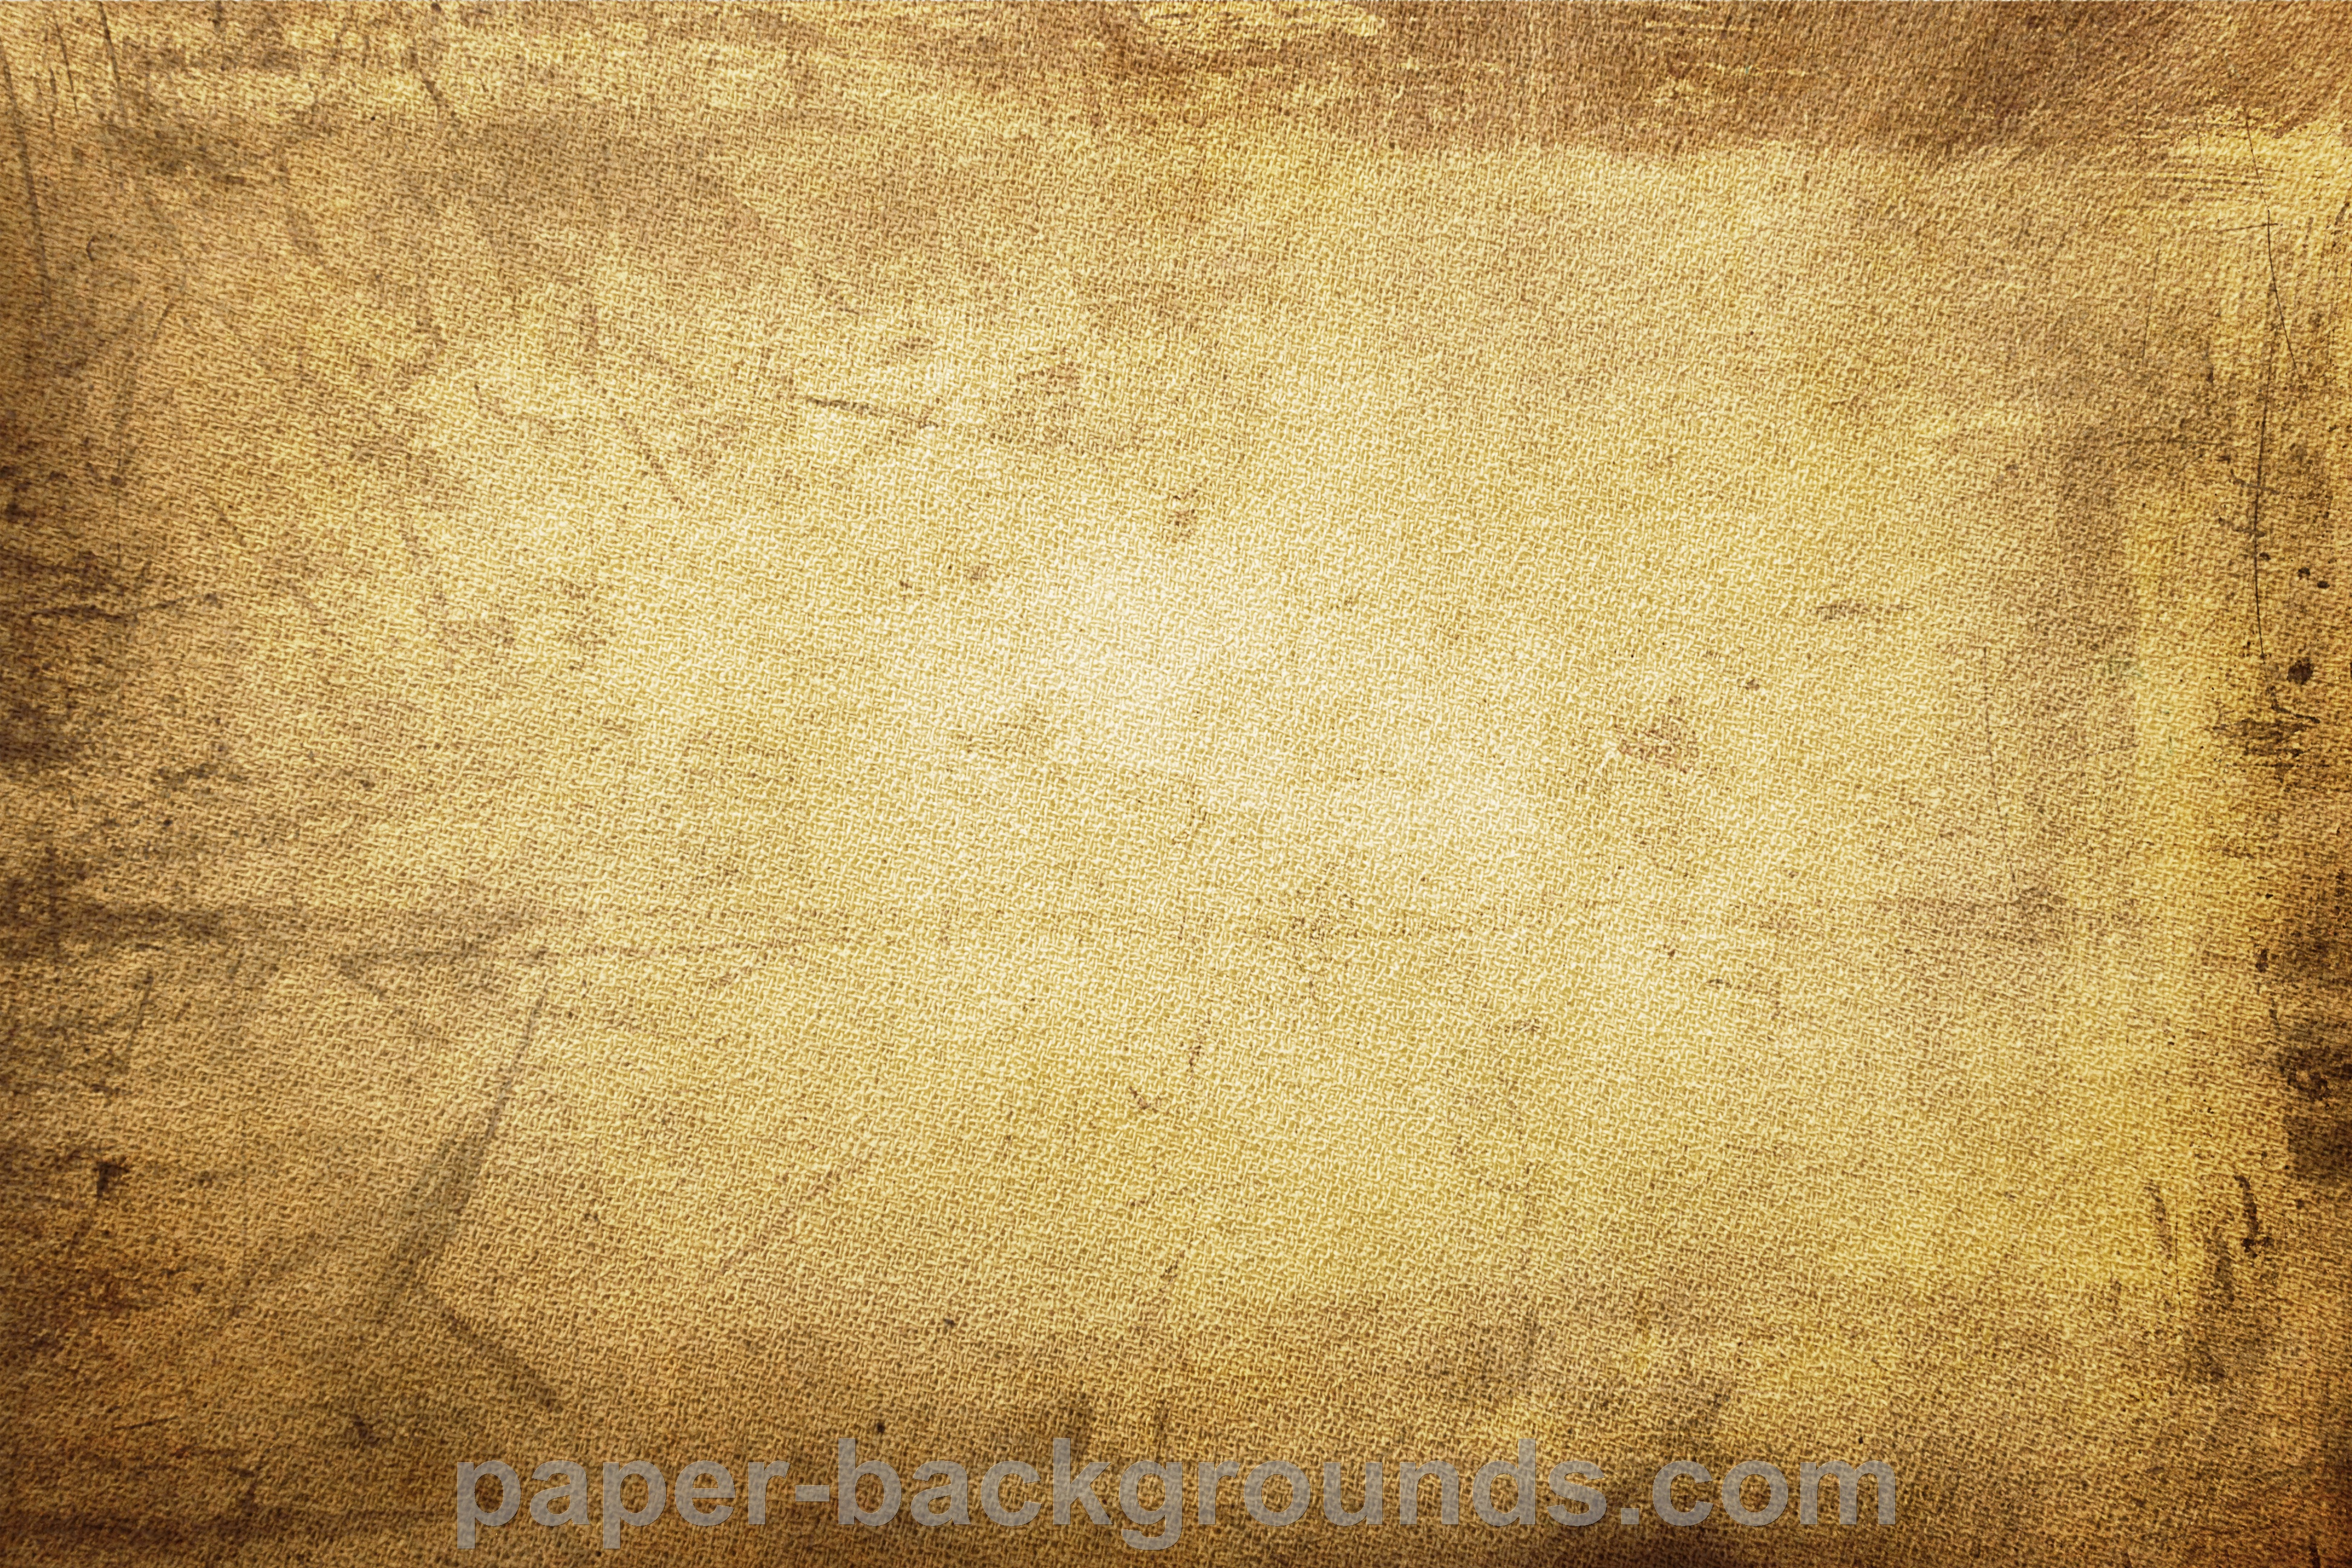 Free download Yellow Vintage Fabric Texture Background [3888x2592 ...